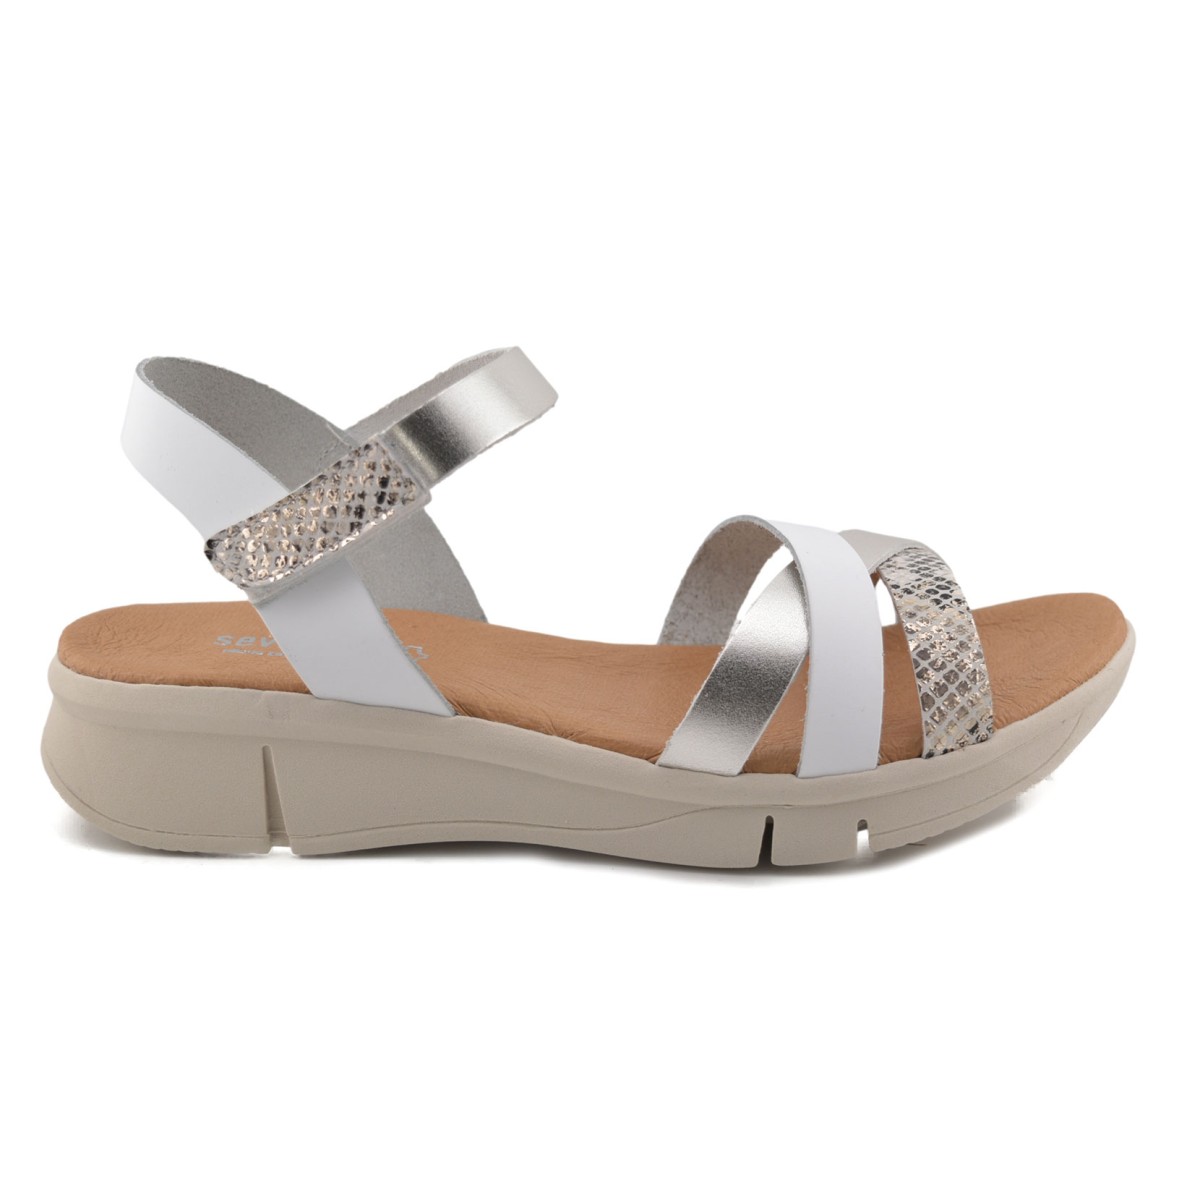 White and silver leather sandals by CBP